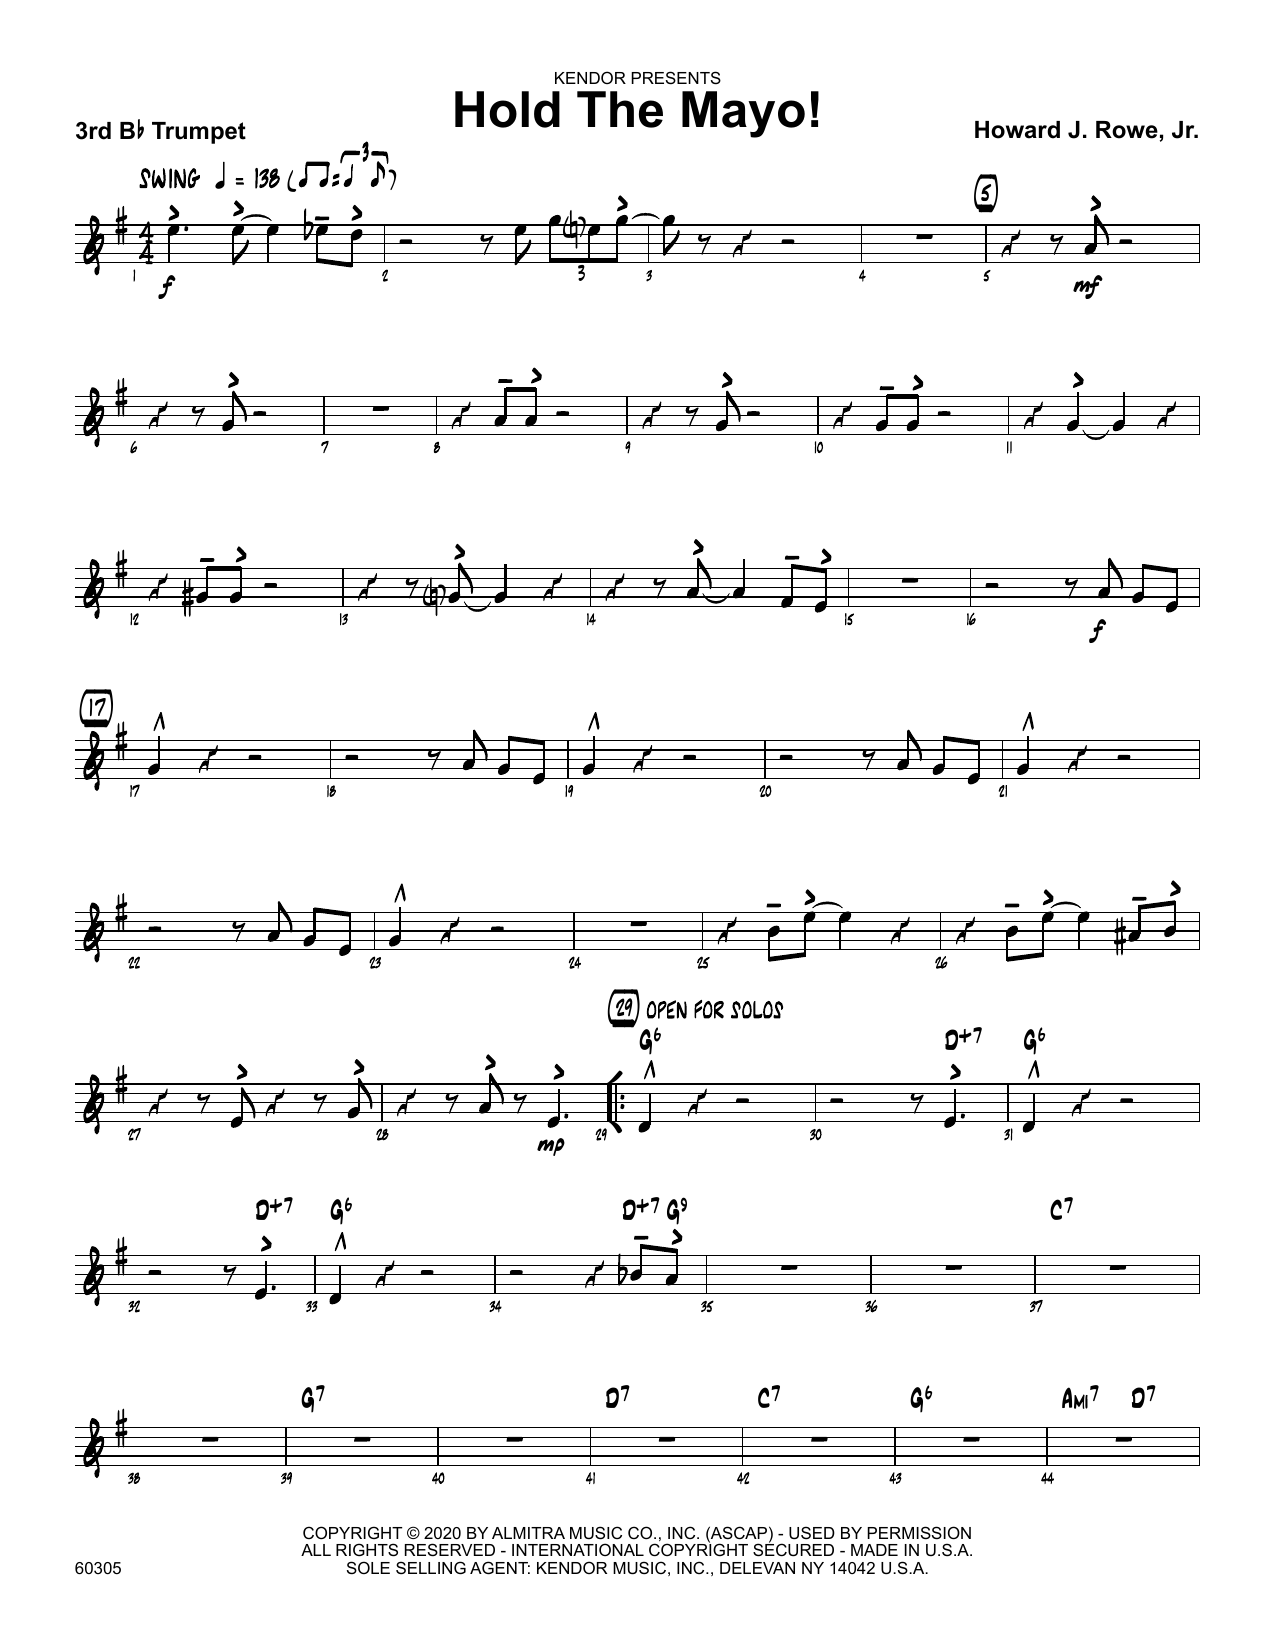 Download Howard Rowe Hold The Mayo! - 3rd Bb Trumpet Sheet Music